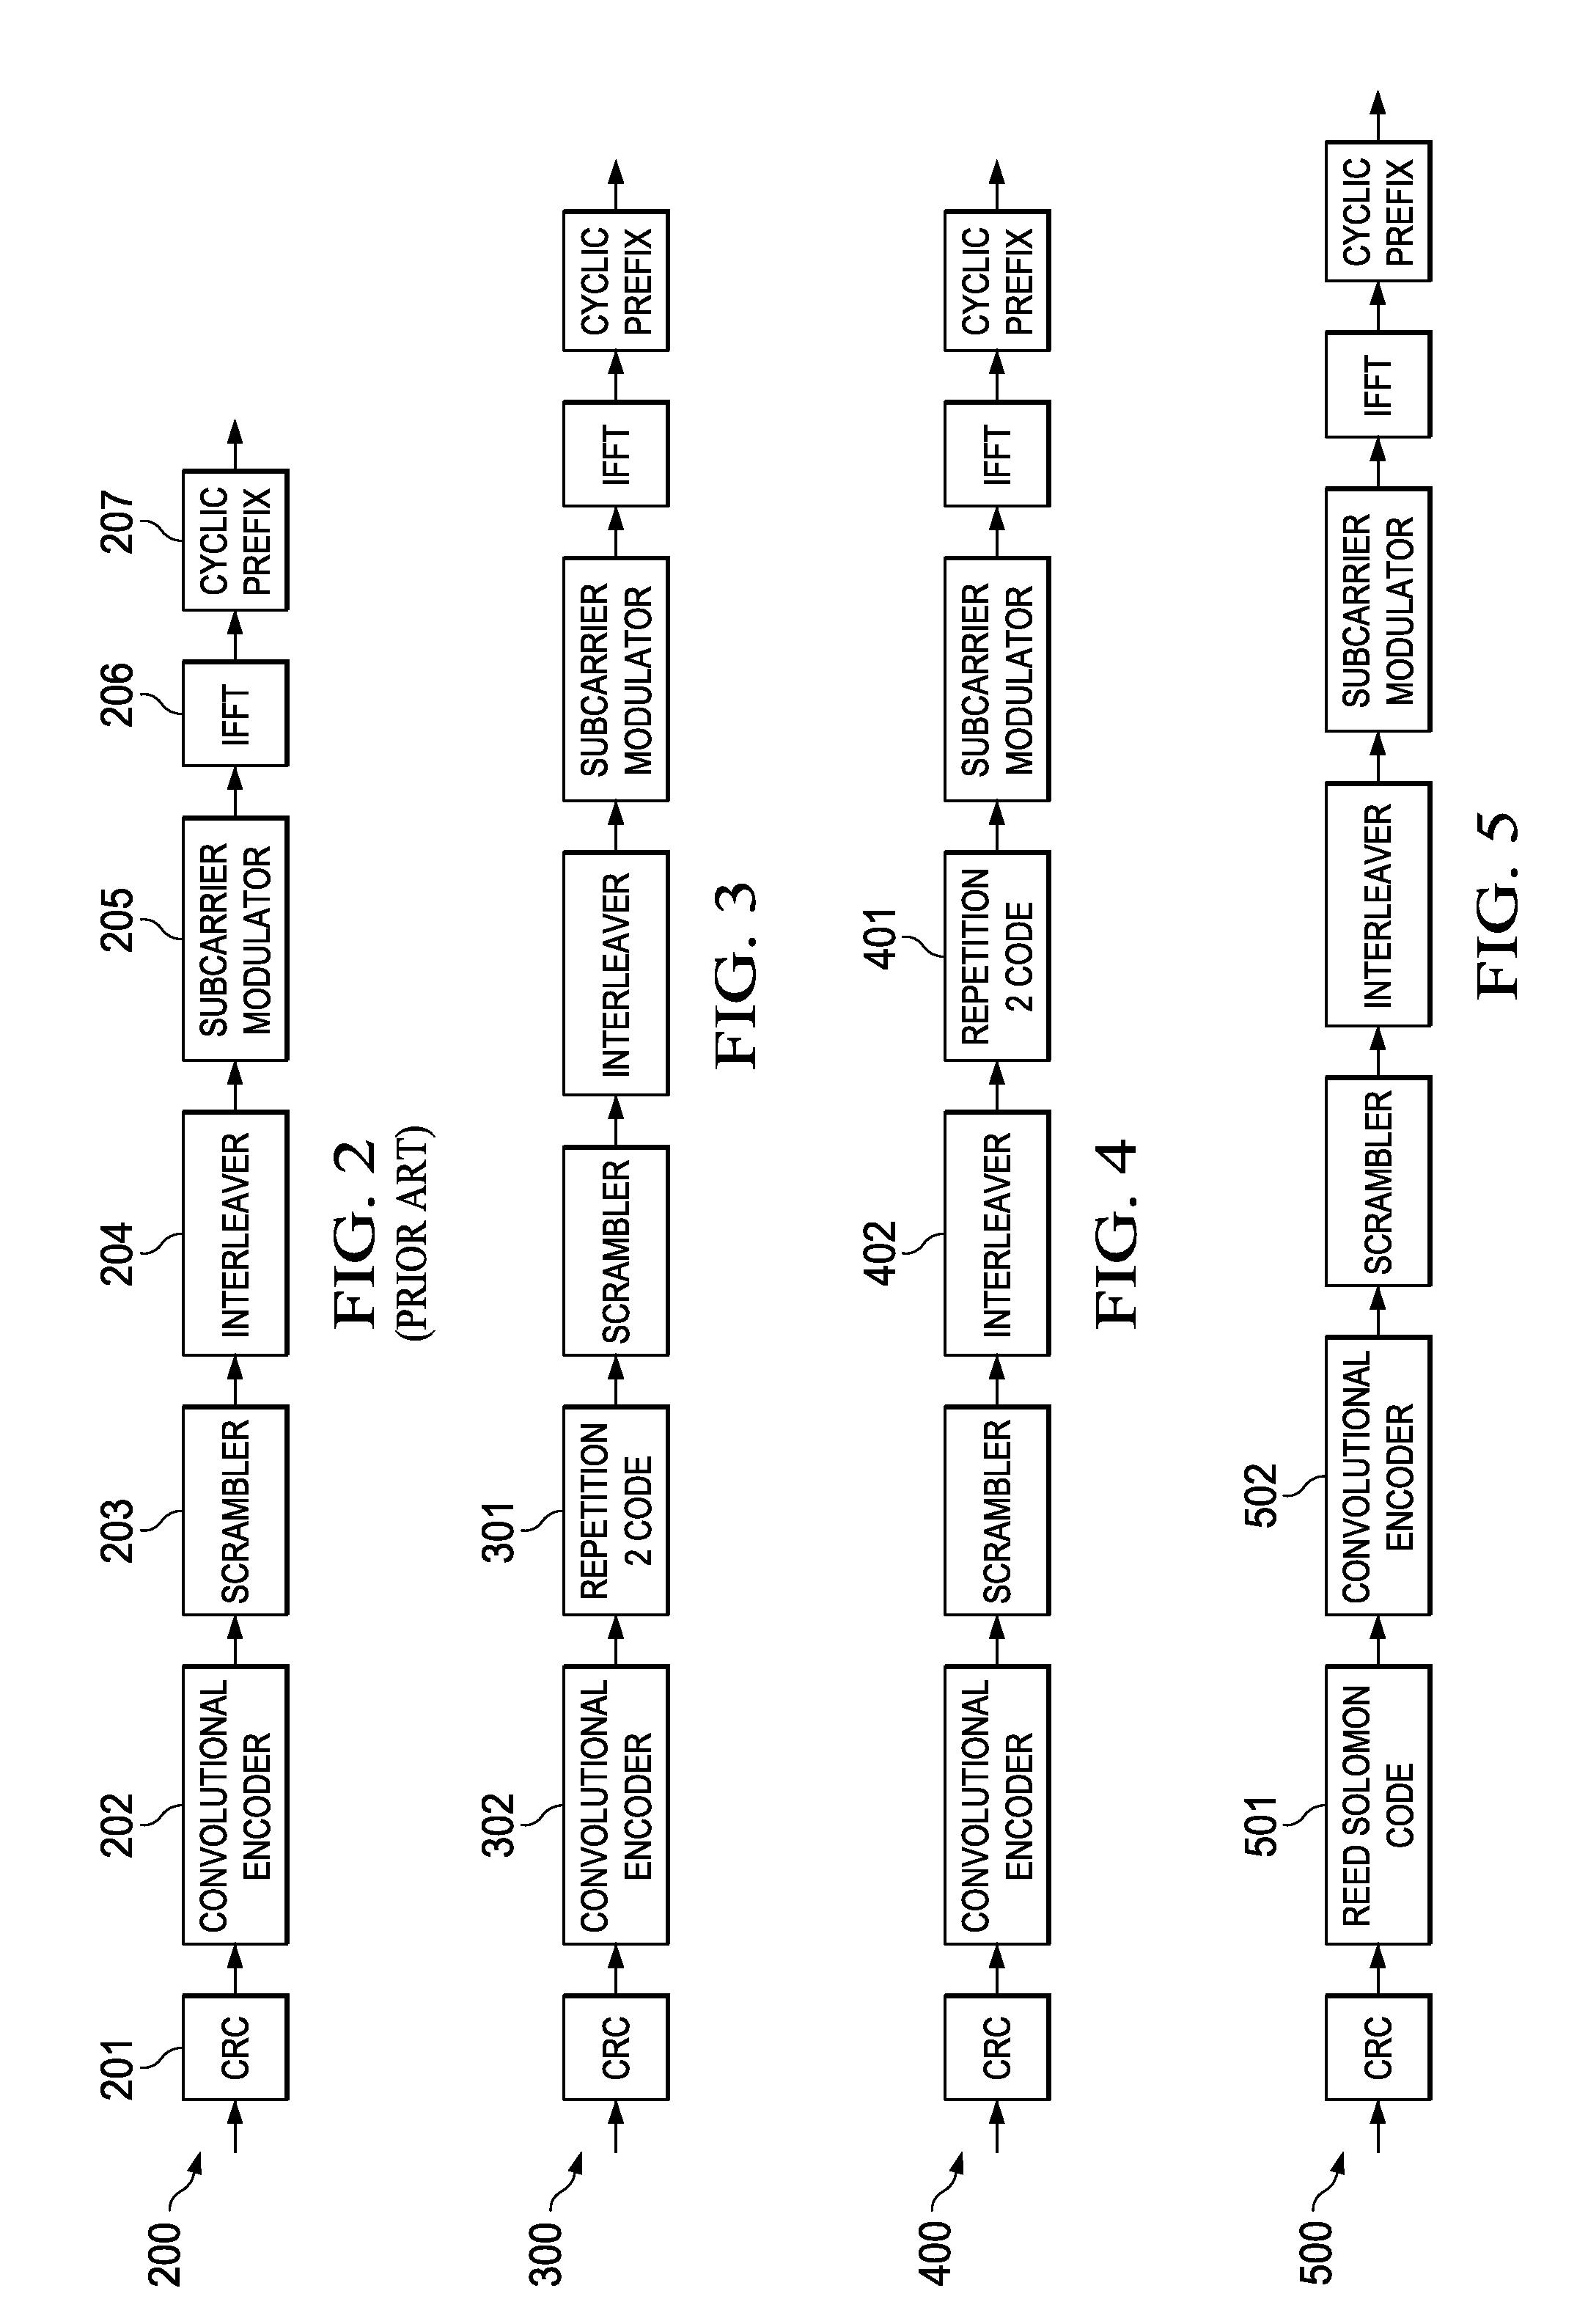 Concatenated Repetition Code with Convolutional Code